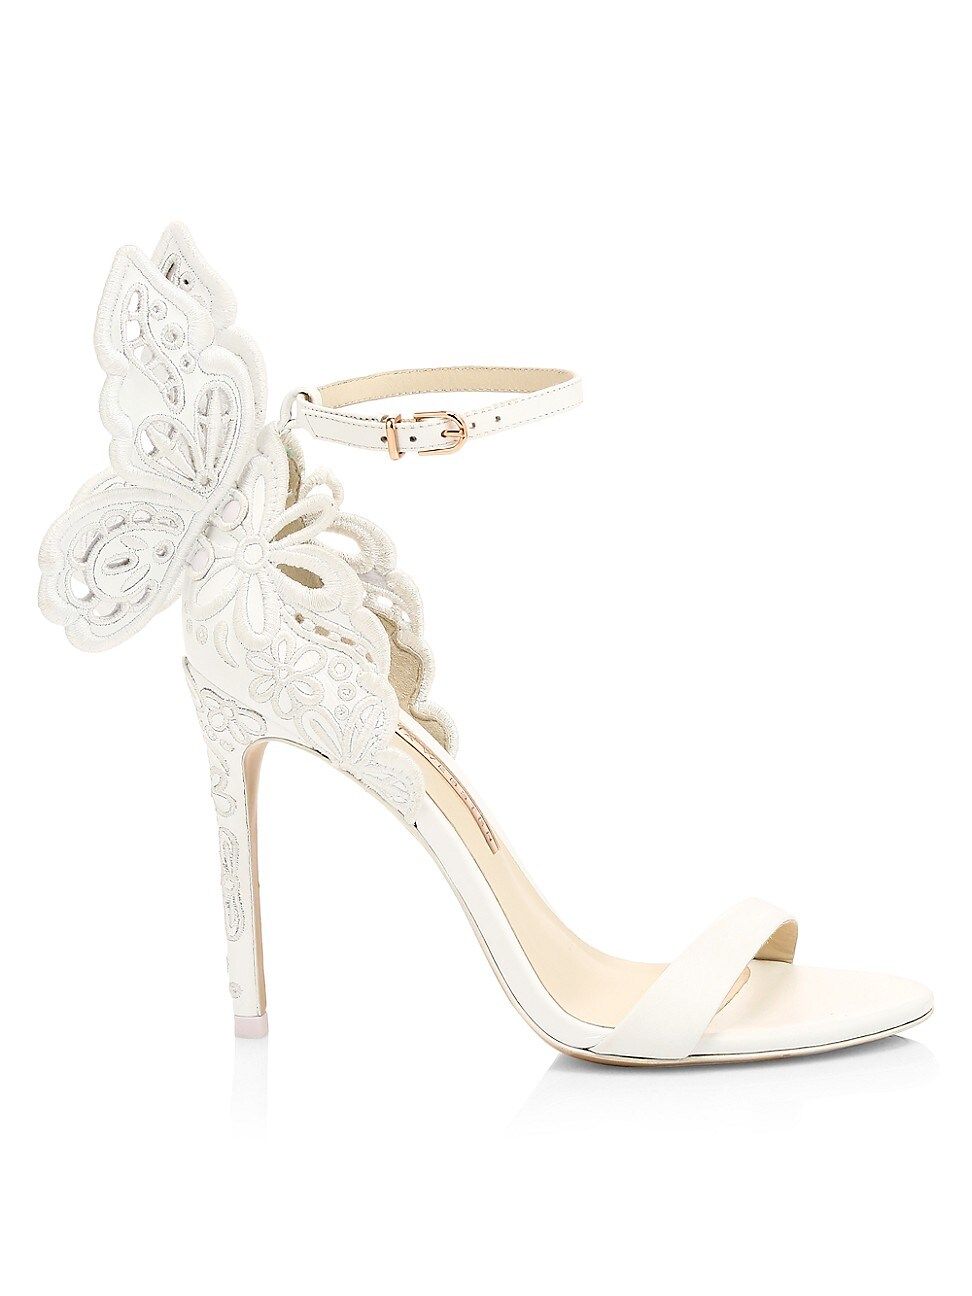 Sophia Webster Women's Chiara Broderie Leather Sandals - White - Size 11 | Saks Fifth Avenue